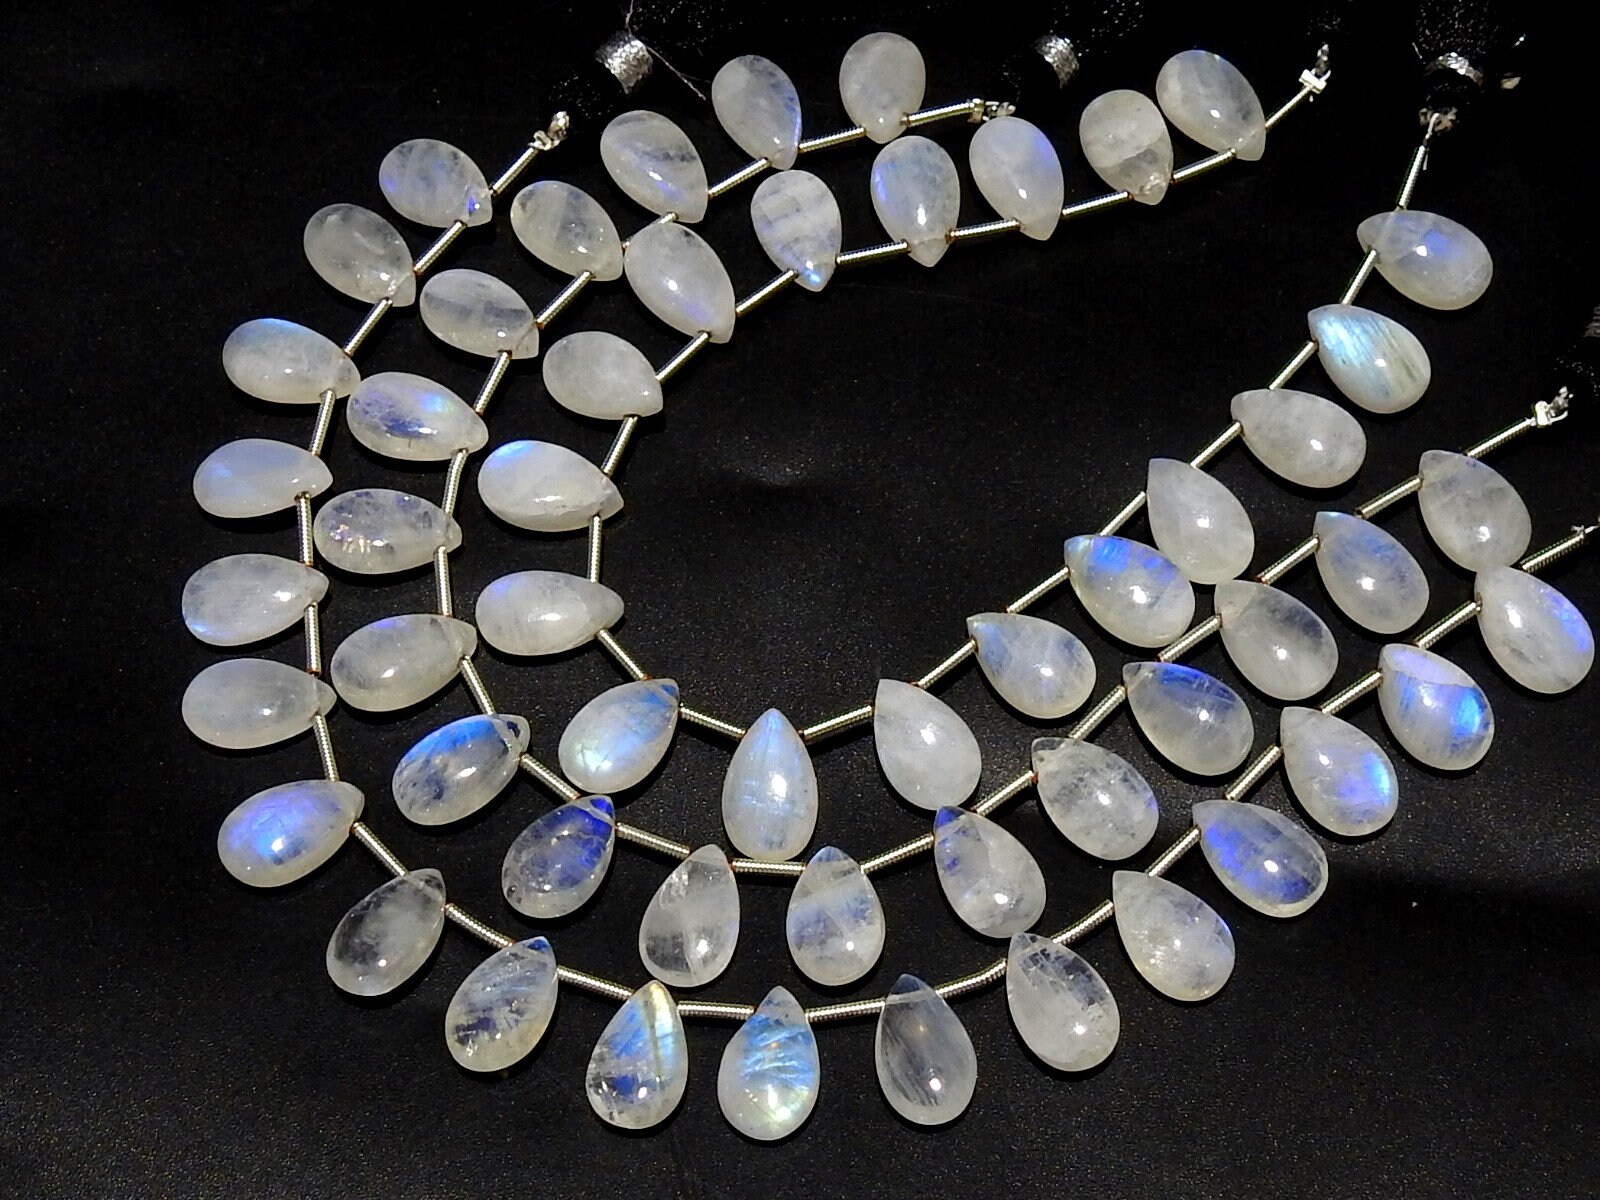 White Rainbow Moonstone Smooth Teardrop,Blue Flashy Fire,Loose Stone,Bead,Calibrated Size,Making Jewelry 9Matched Pair 13X8MM Approx PME-CY3 | Save 33% - Rajasthan Living 11